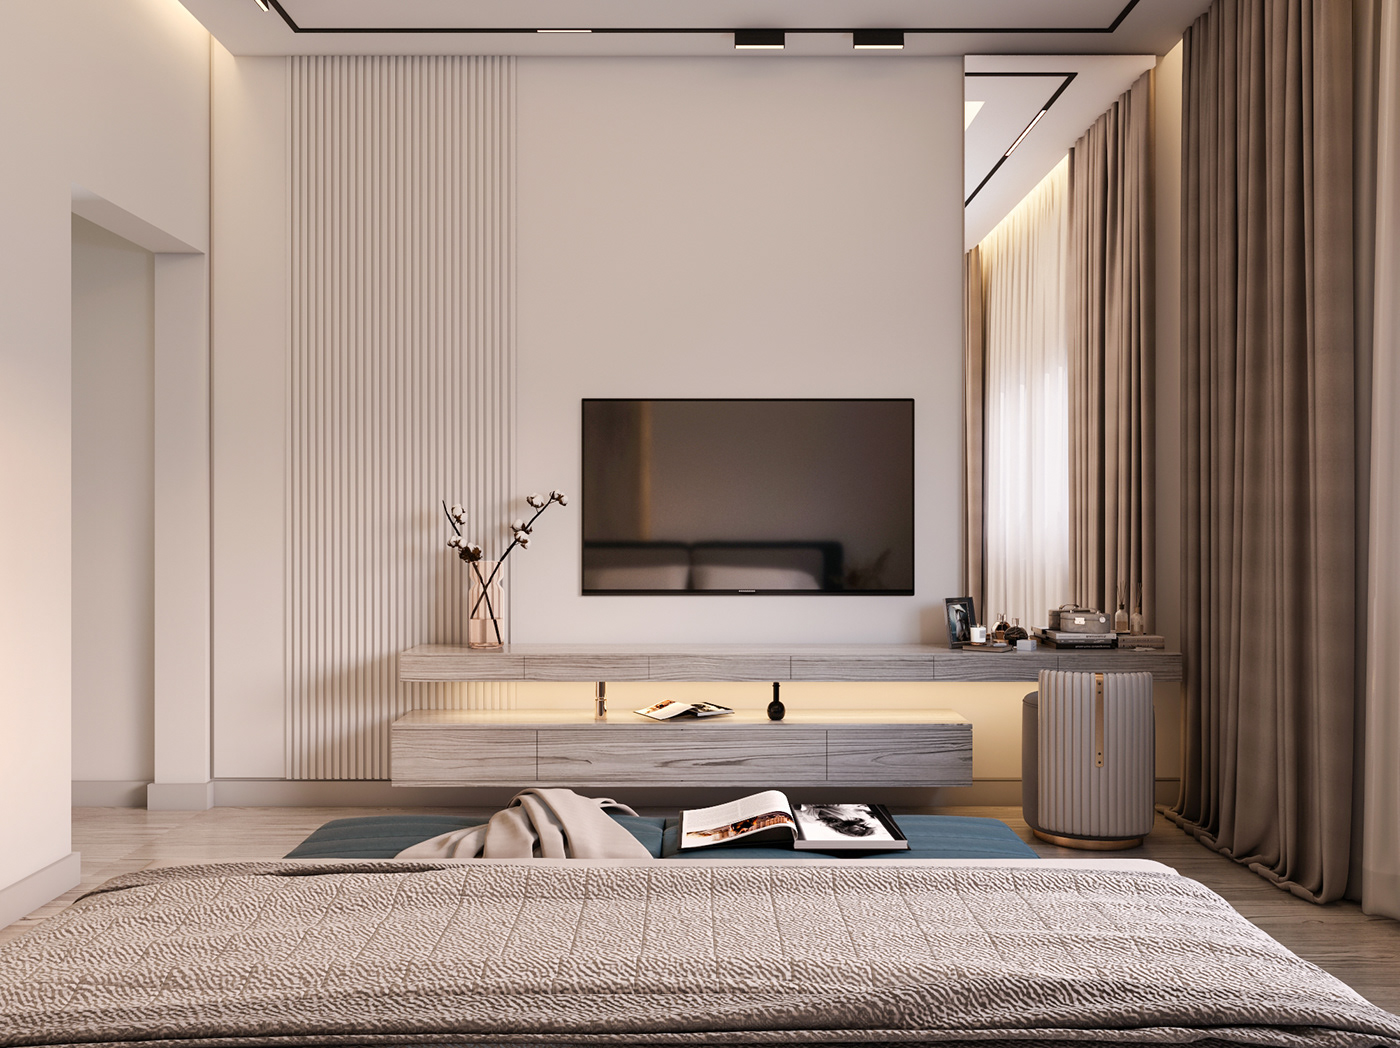 3D 3ds max architecture bedroom Interior Minotti modern Render simple vray